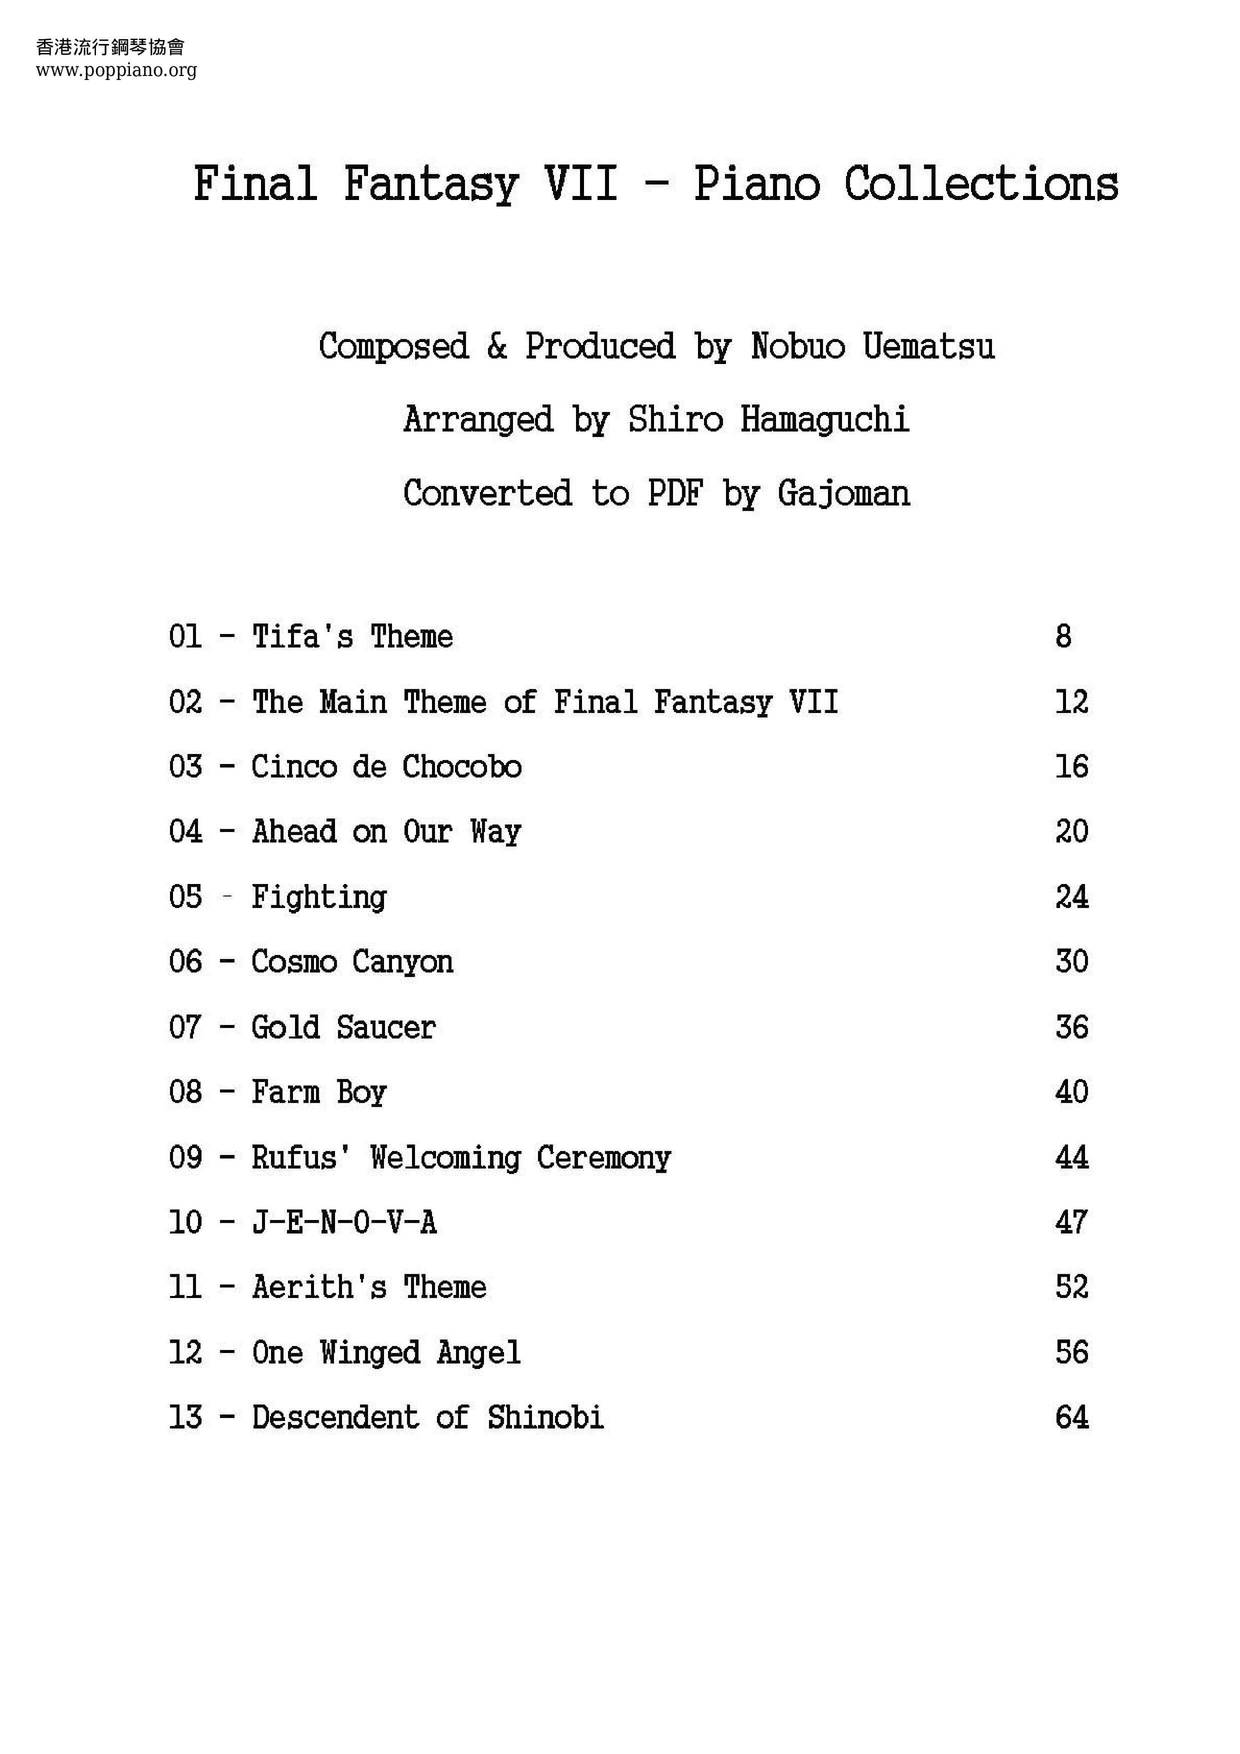 FF7 Piano Collections 62 Pages Score